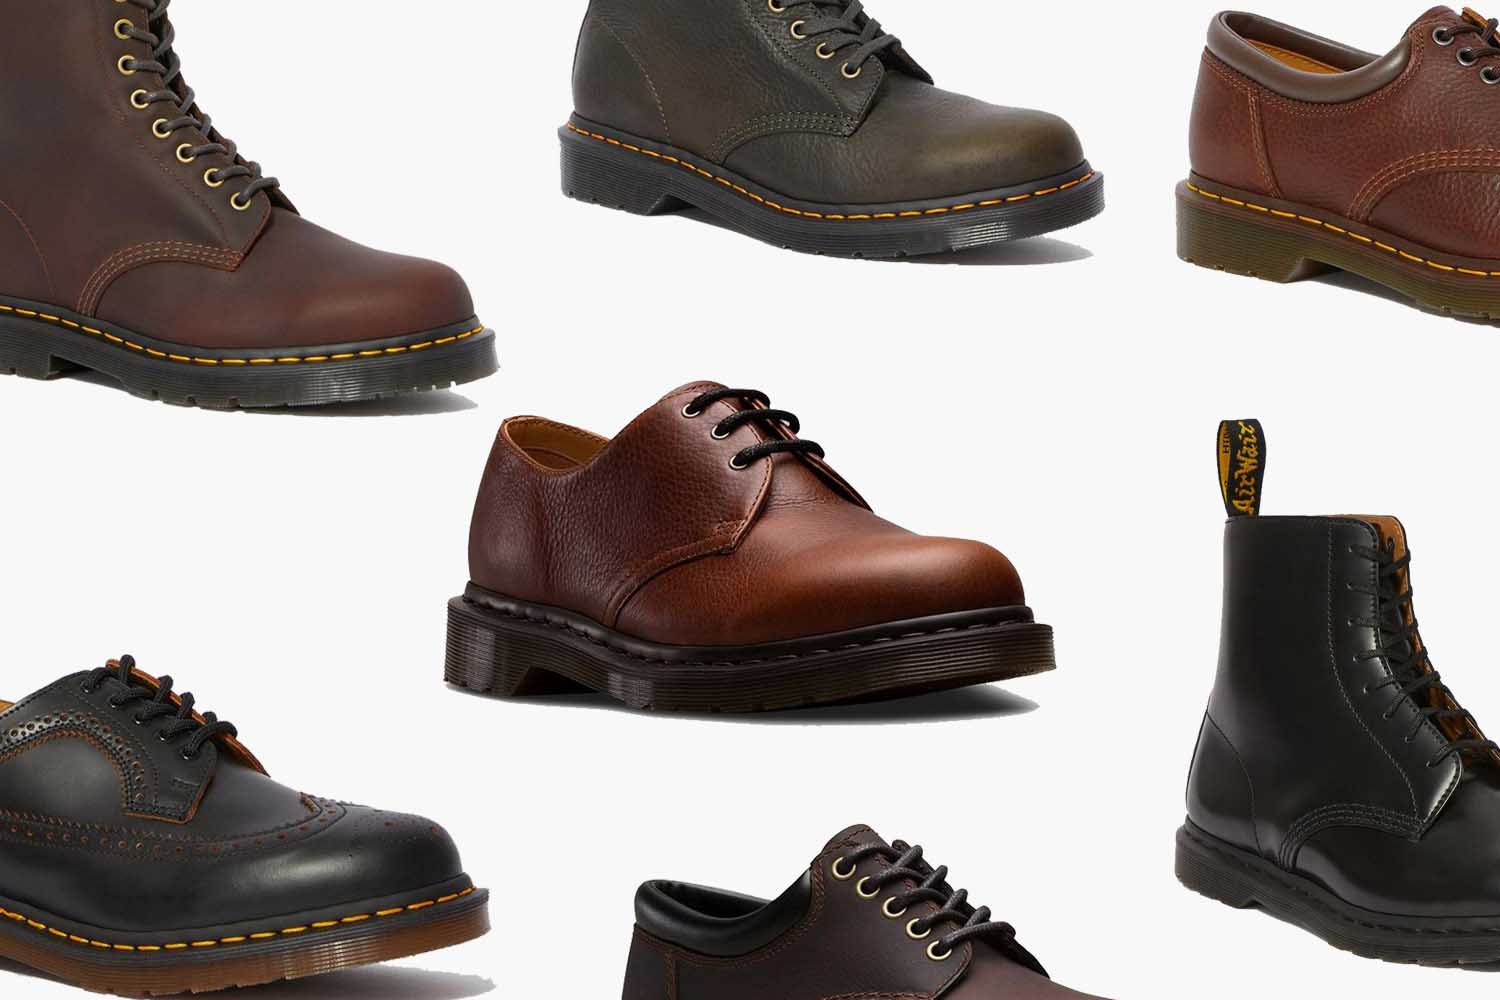 Dr. Martens: Not Just for the Punks and Goths - InsideHook